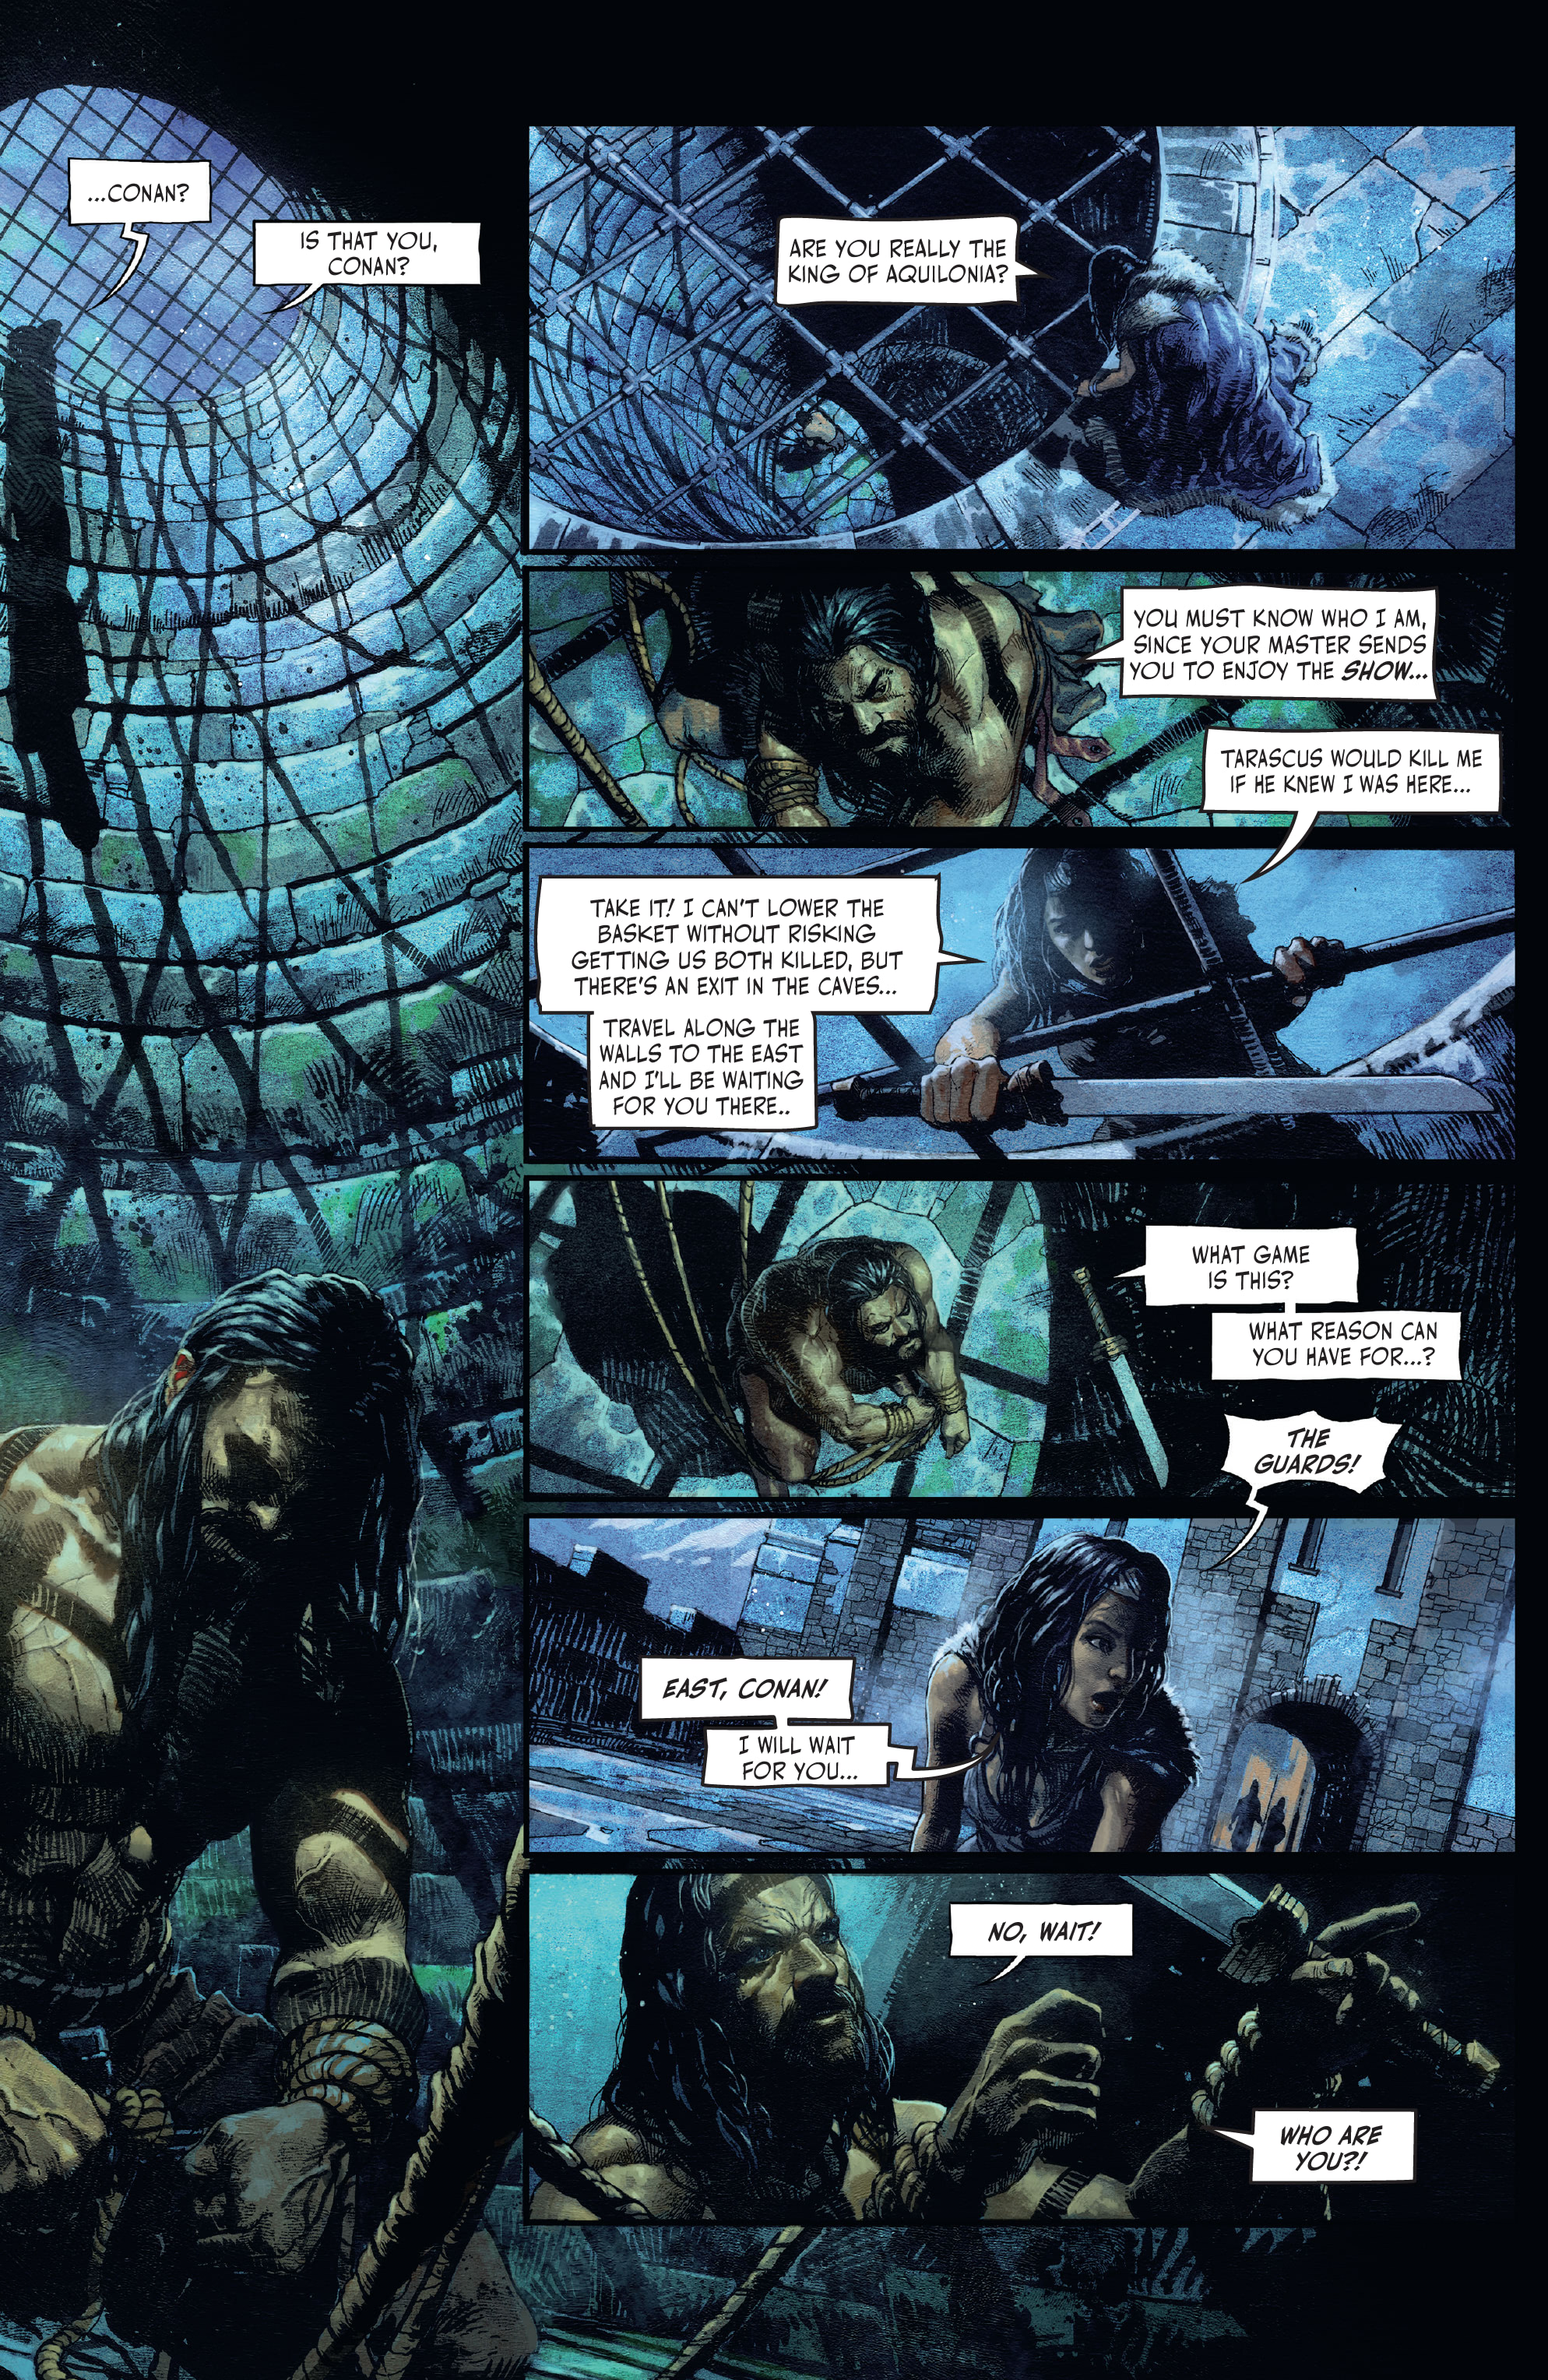 The Cimmerian: Hour of the Dragon (2022-): Chapter 2 - Page 3